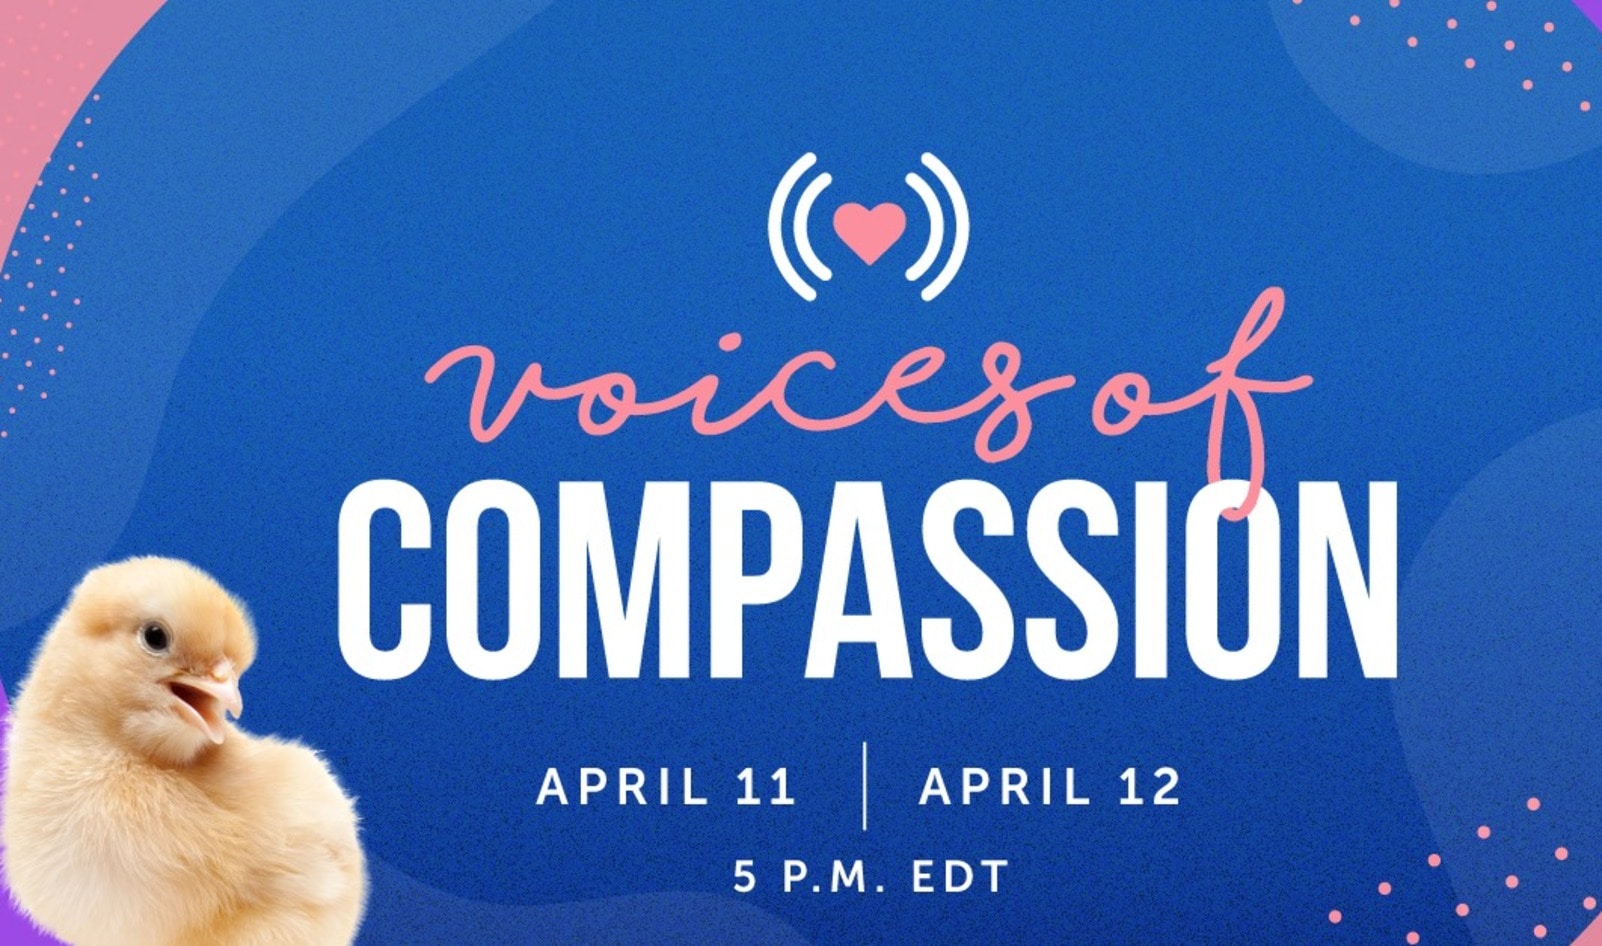 Two-Day Virtual Concert to Feature More than 30 Animal-Rights Activists and Musicians